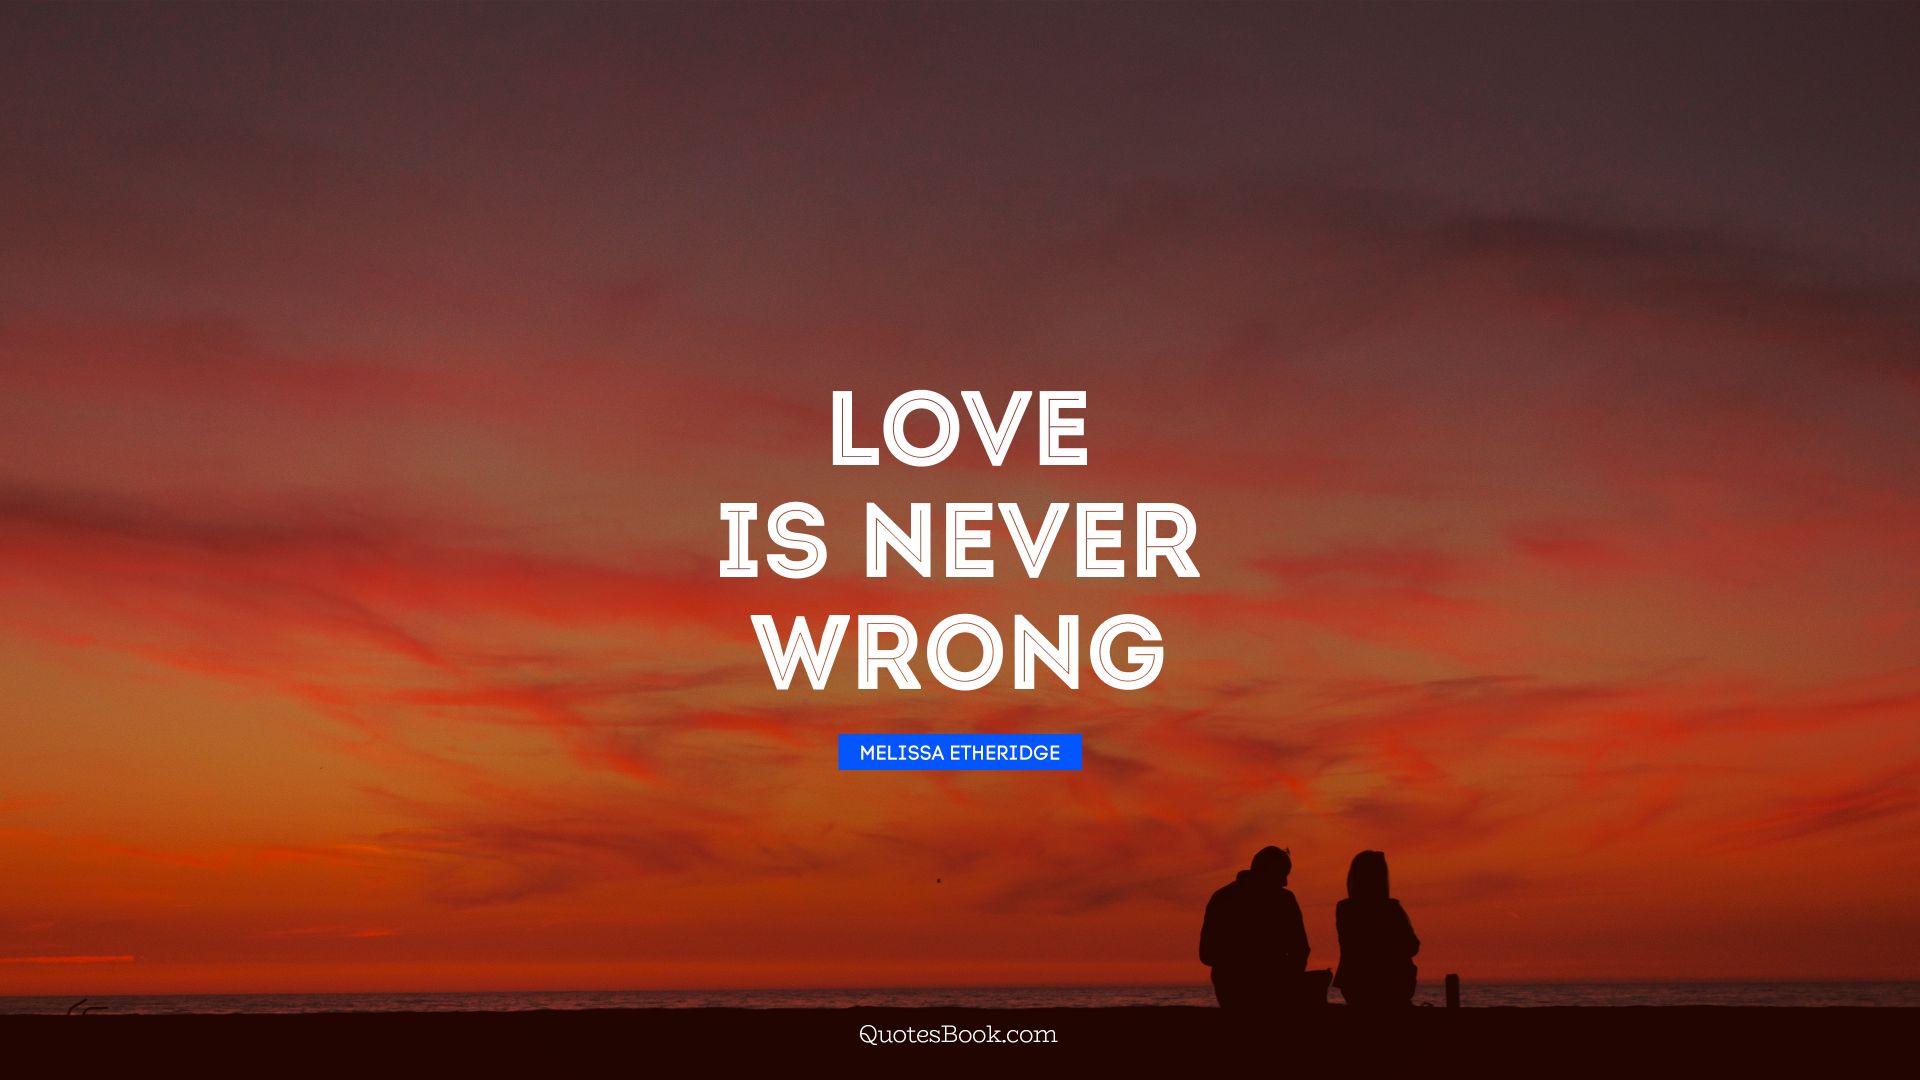 Love is never wrong. - Quote by Melissa Etheridge